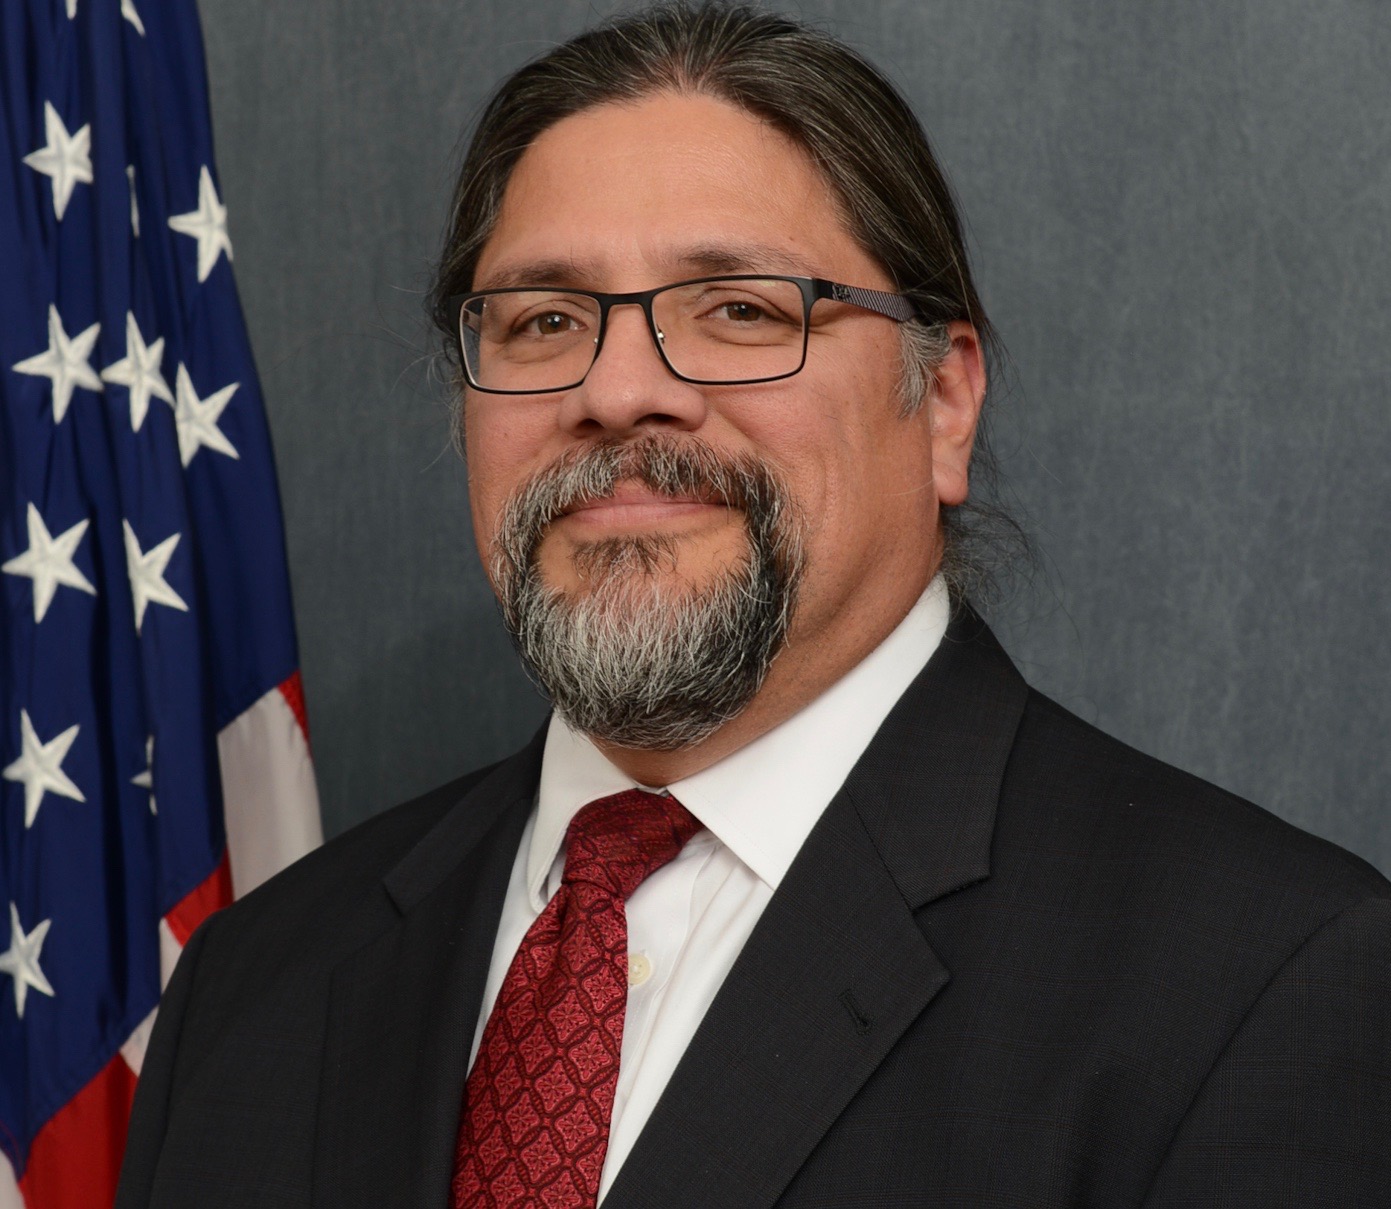 New Trump hire at Bureau of Indian Affairs makes first appearance on Capitol Hill